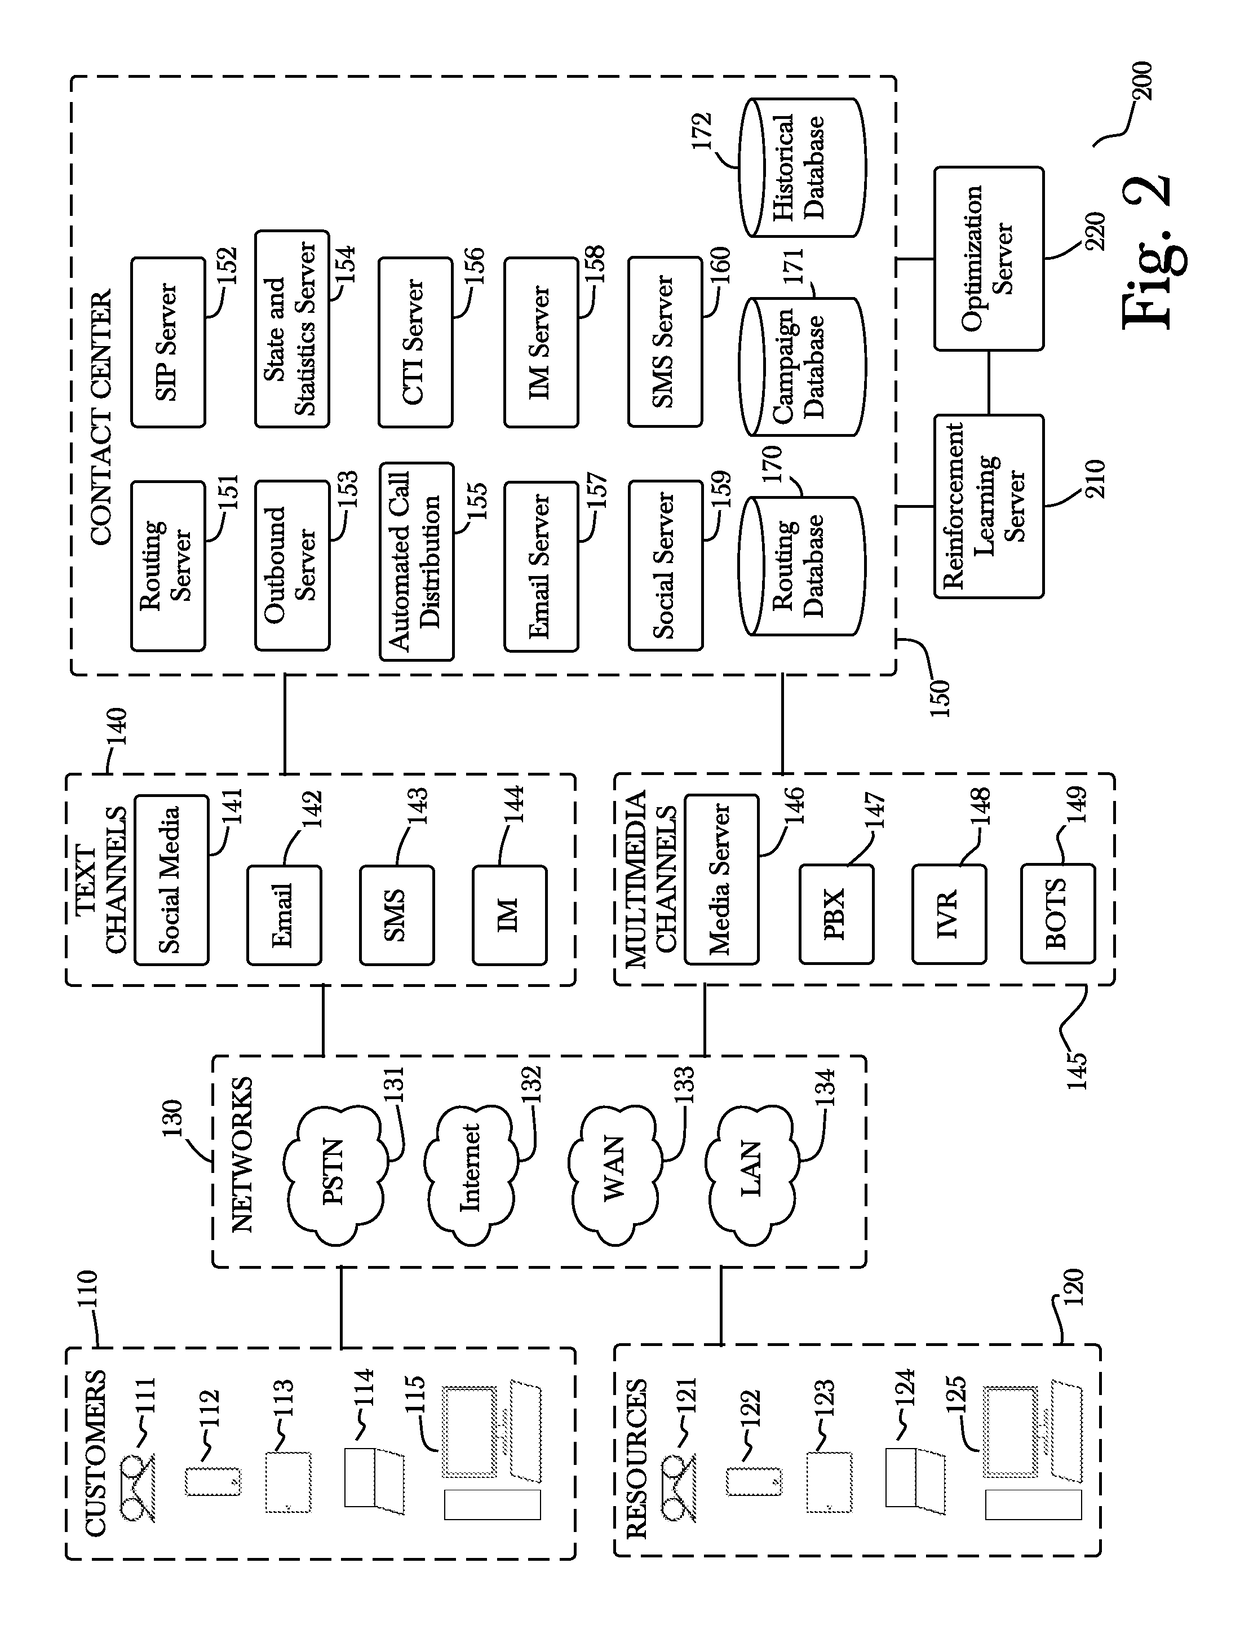 System and method for optimizing communication operations using reinforcement learning